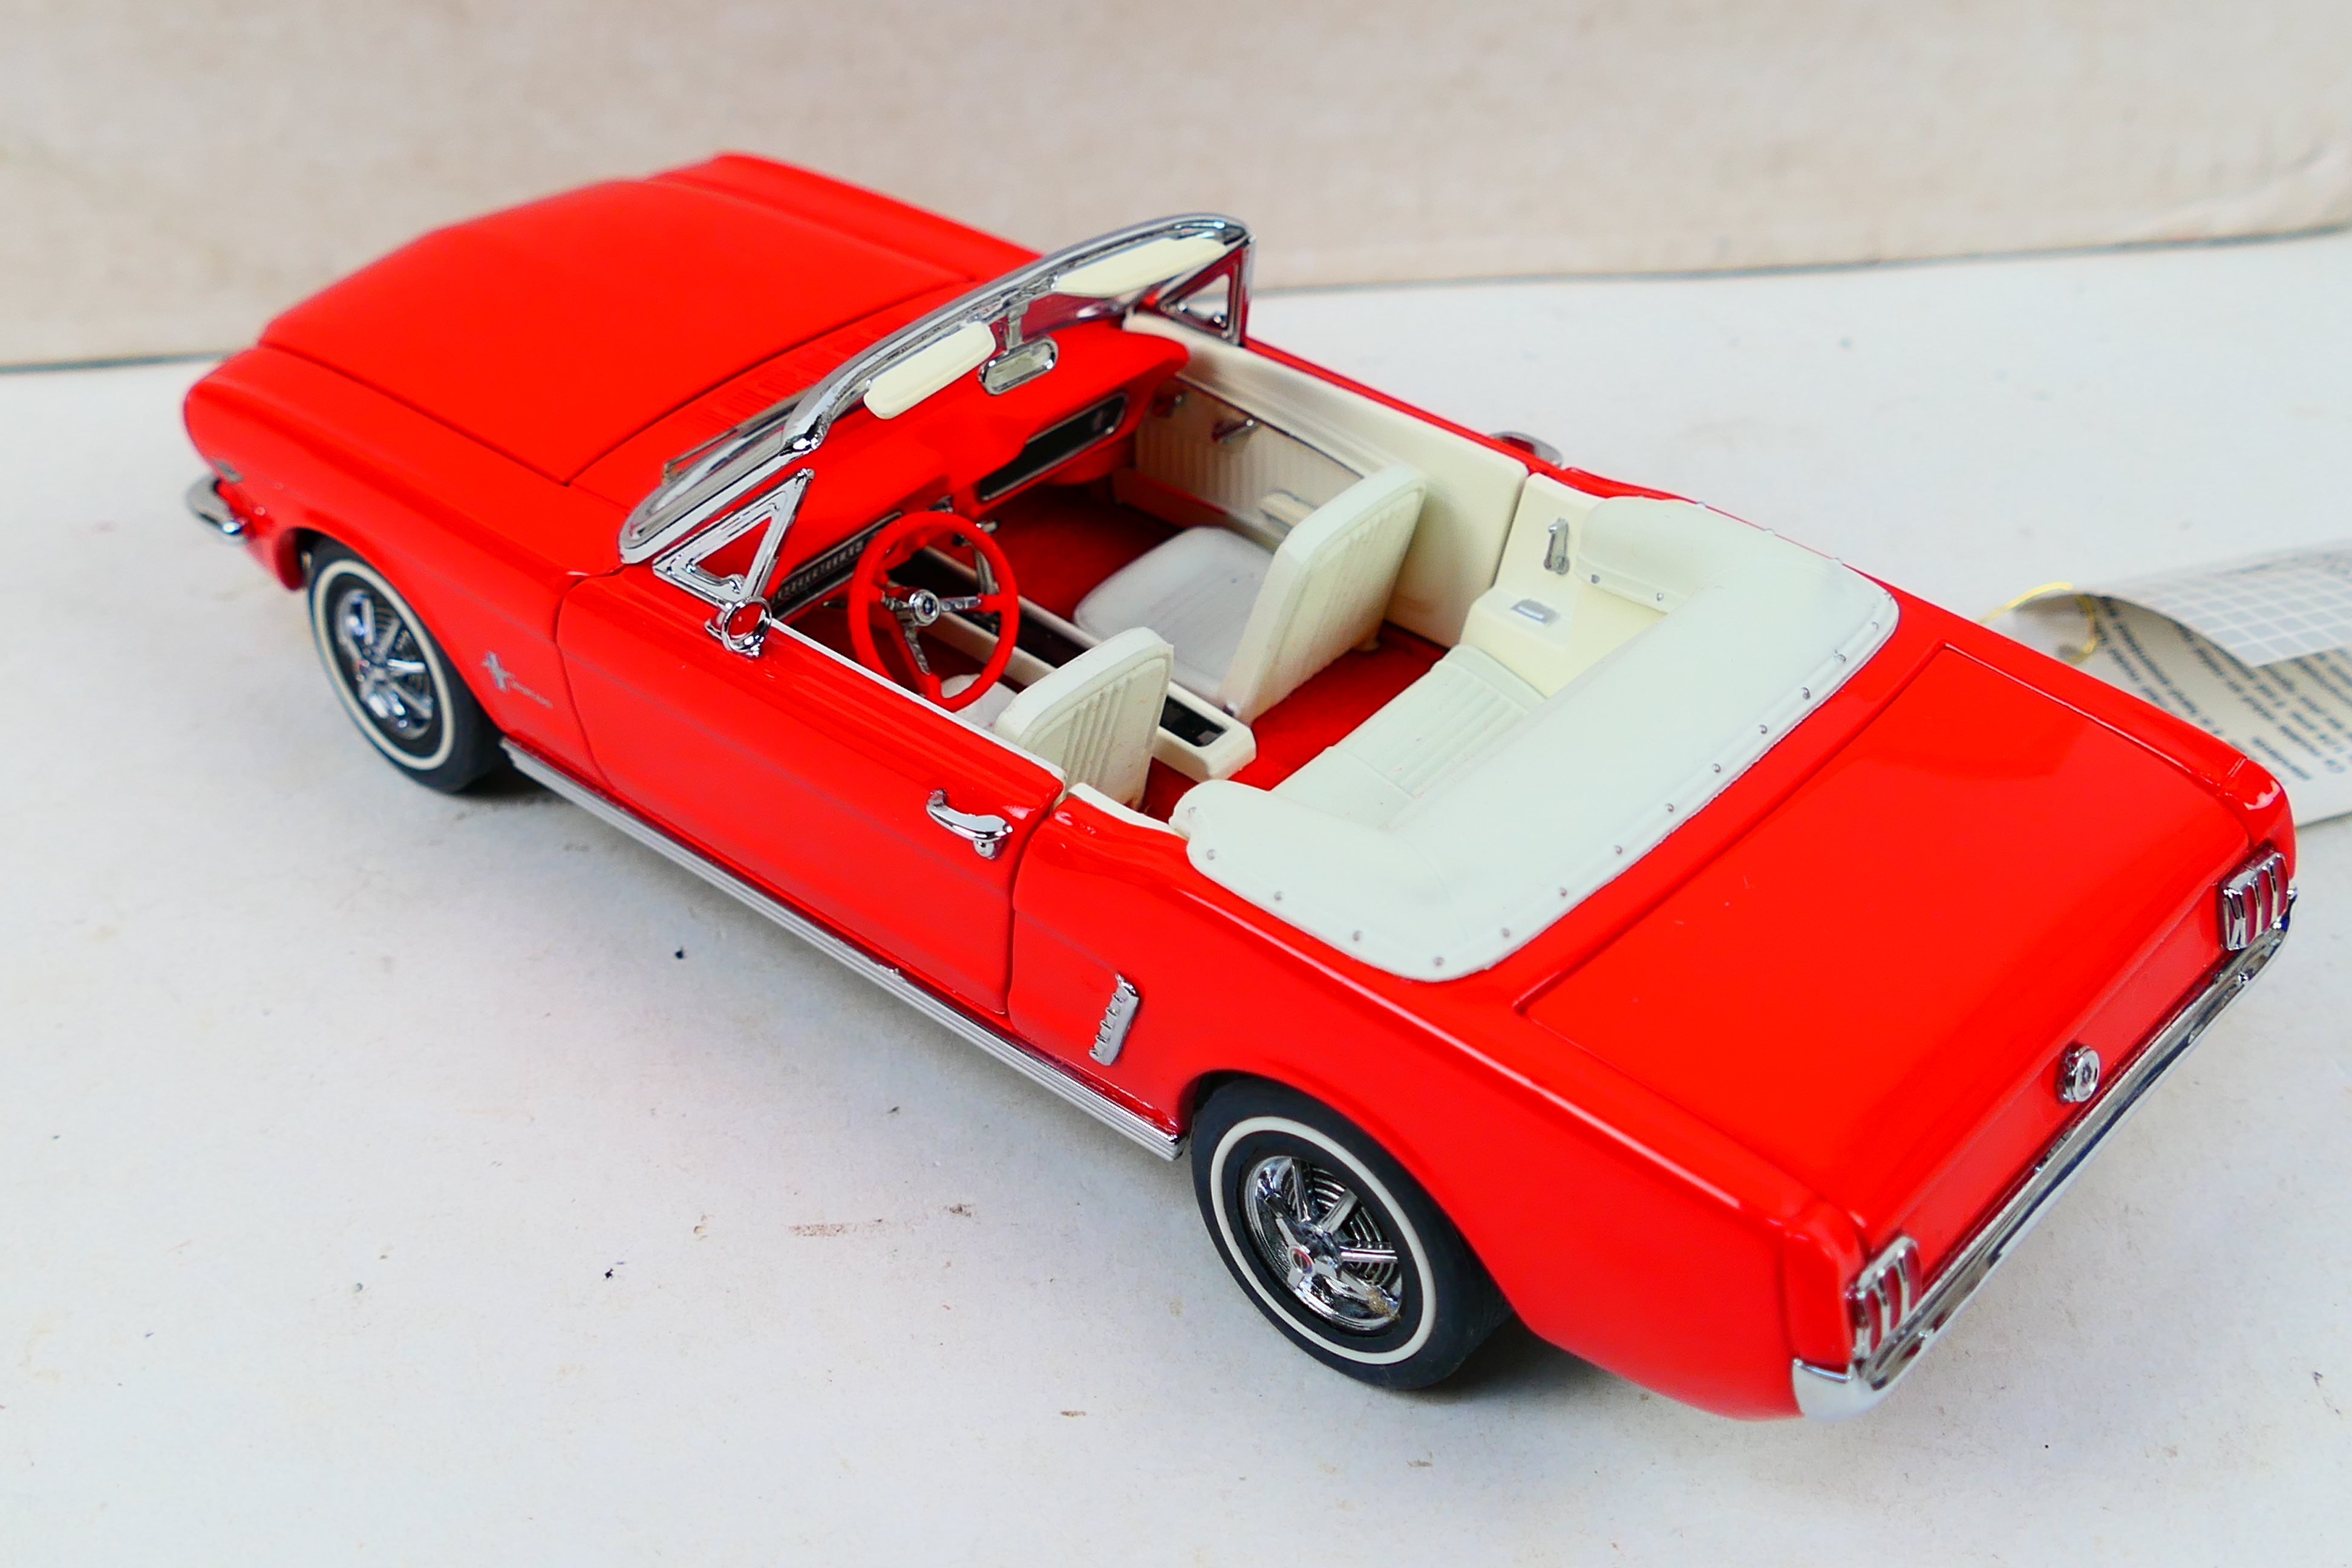 Franklin Mint - Precision Models. A boxed 1964 1/2 Ford Mustang, appearing in Excellent condition. - Image 2 of 3